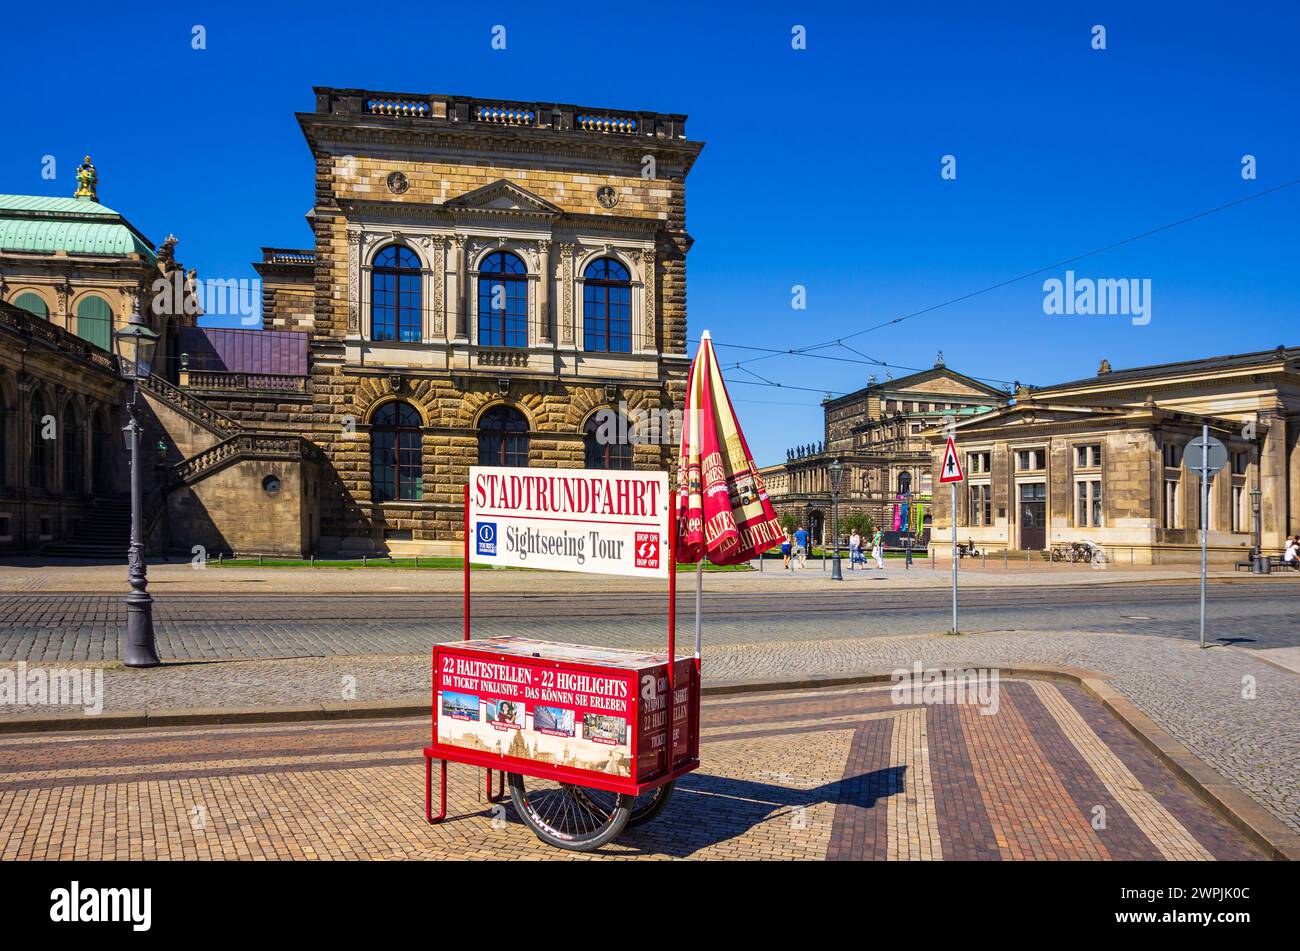 Ticket sales stand and stop for sightseeing tours on Sophienstrasse in front of Zwinger Palace, Inner Old Town, Dresden, Saxony, Germany. Stock Photo